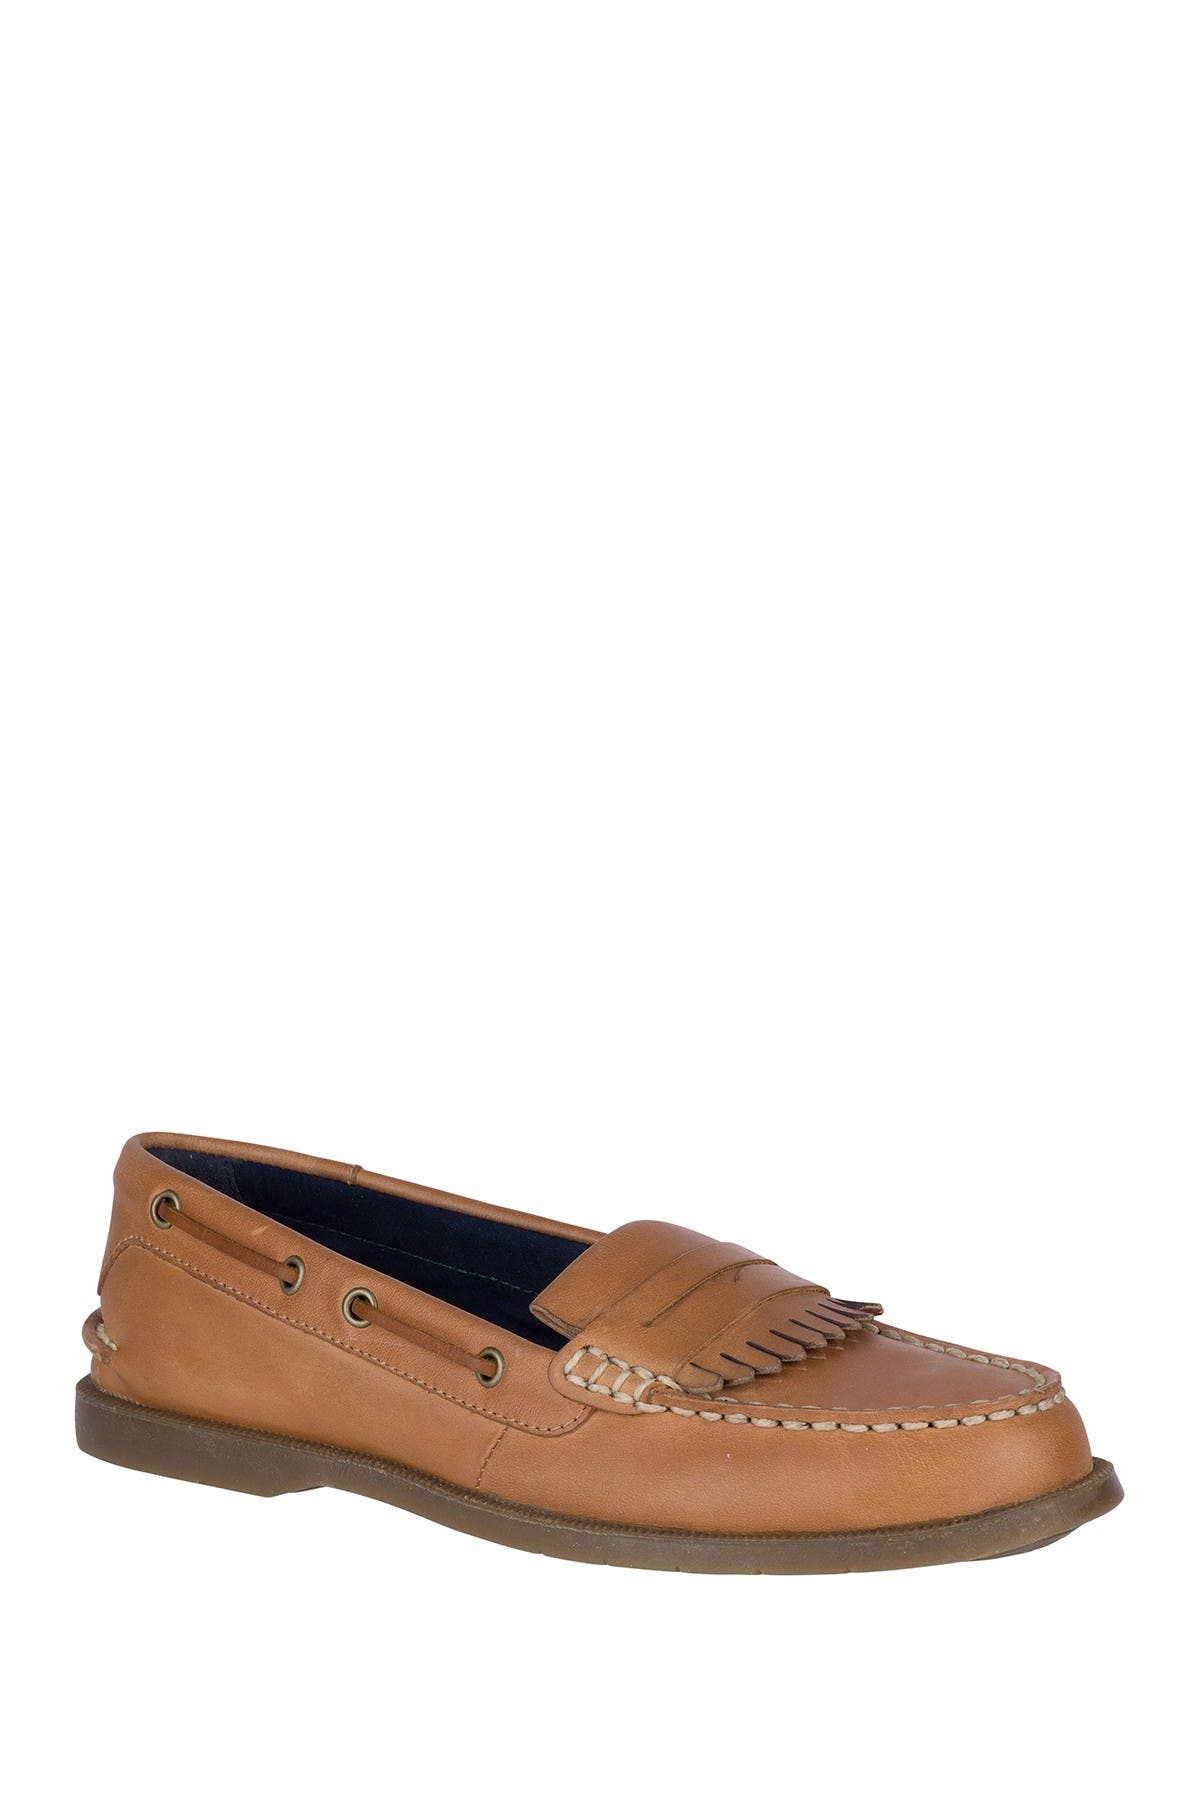 sperry flat shoes